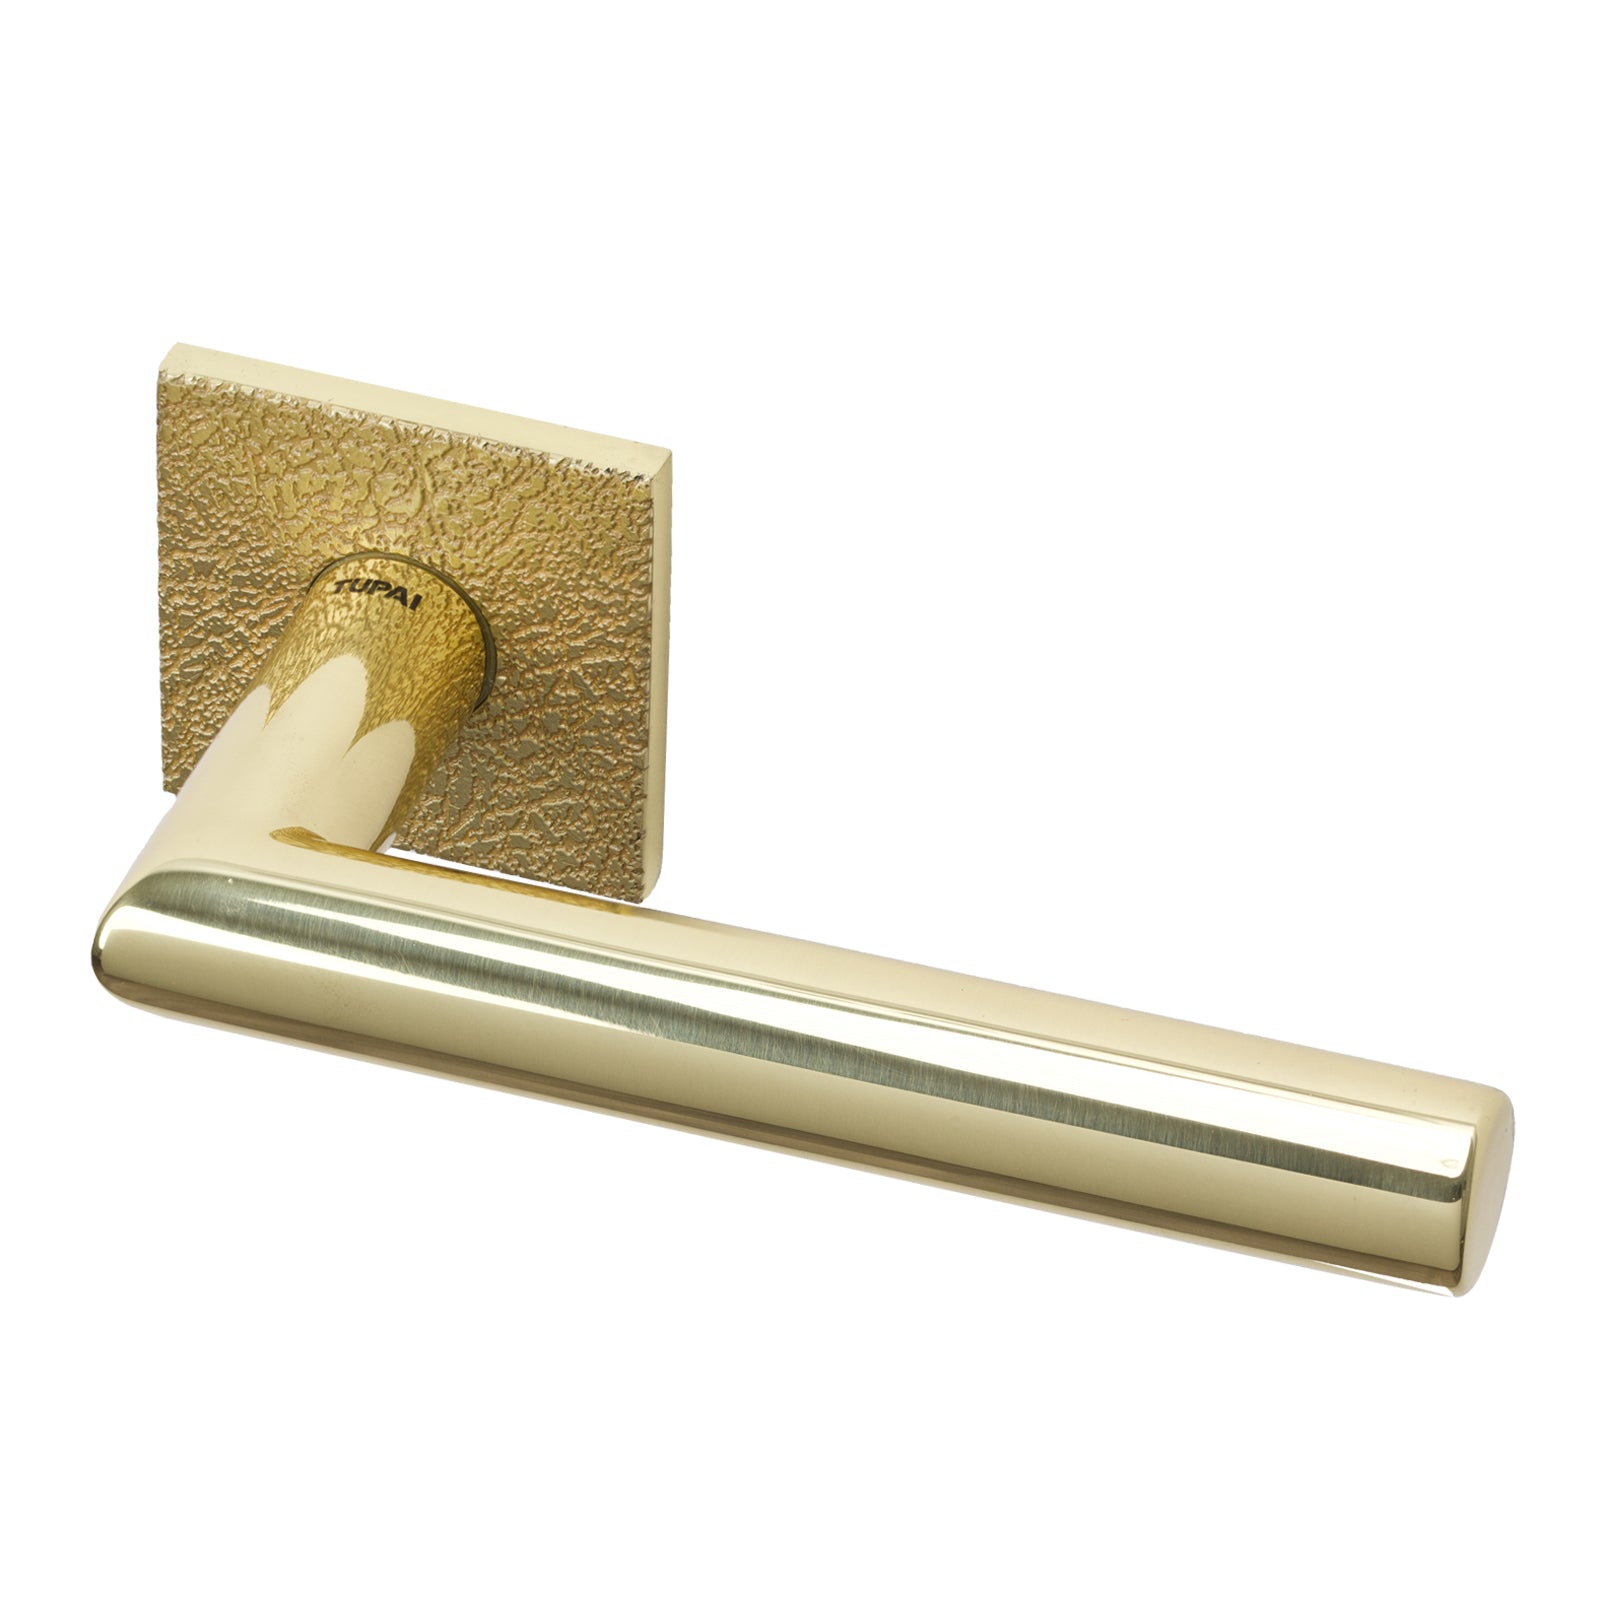 Larouco Leather Texture Lever on Rose Door Handle in Polished Brass Finish SHOW